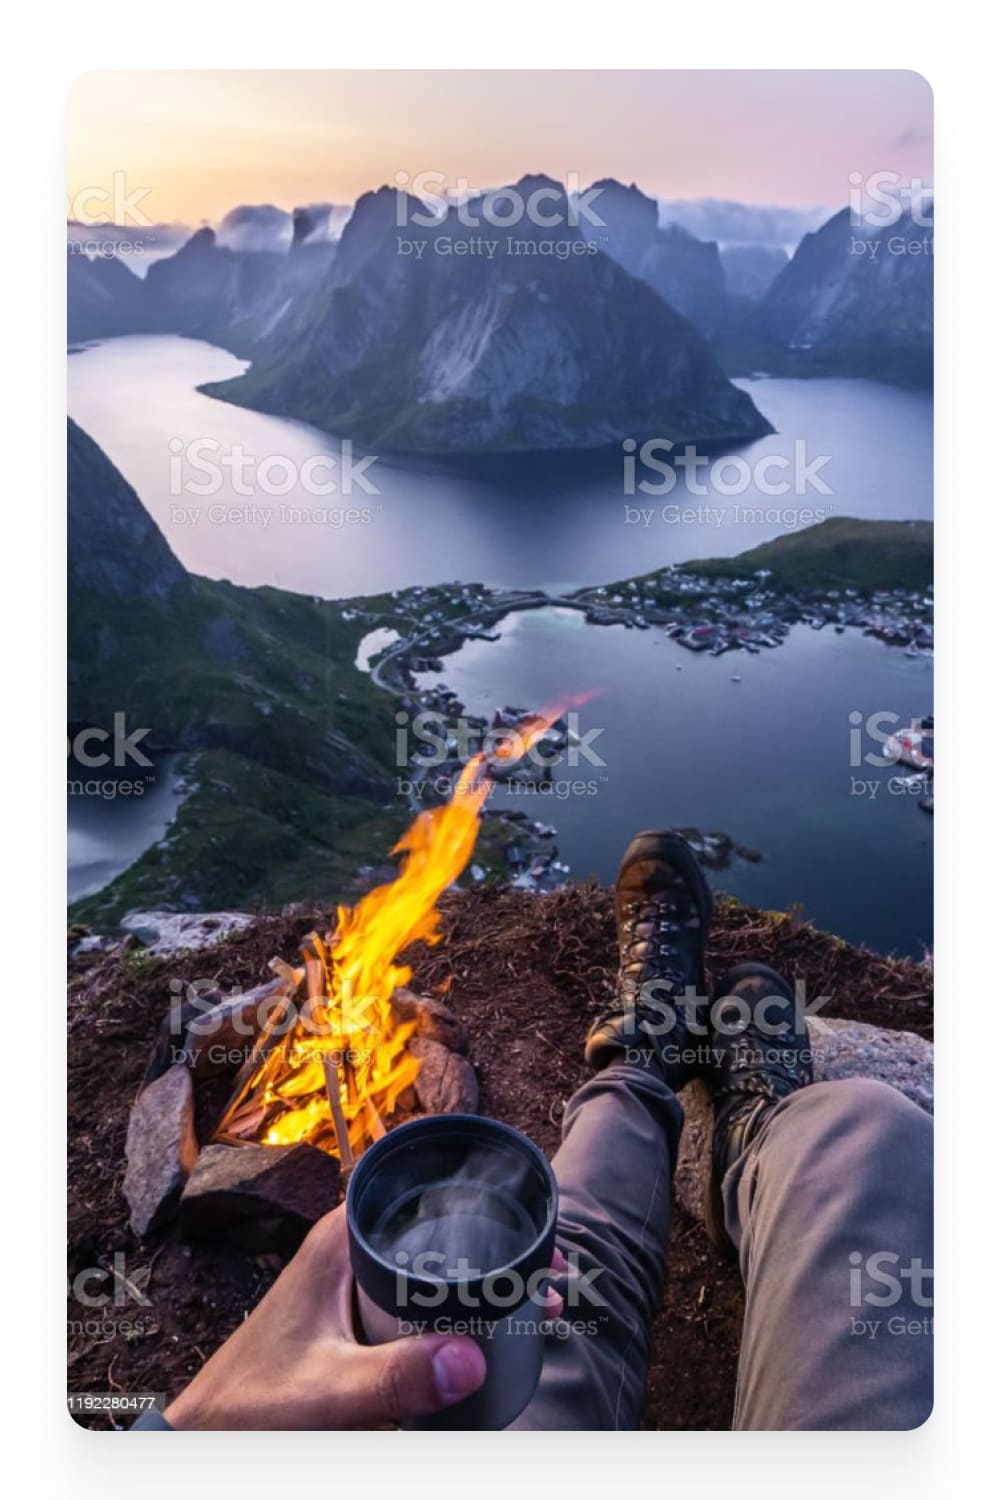 Photo of a guy sitting by the fire against the backdrop of fjords.